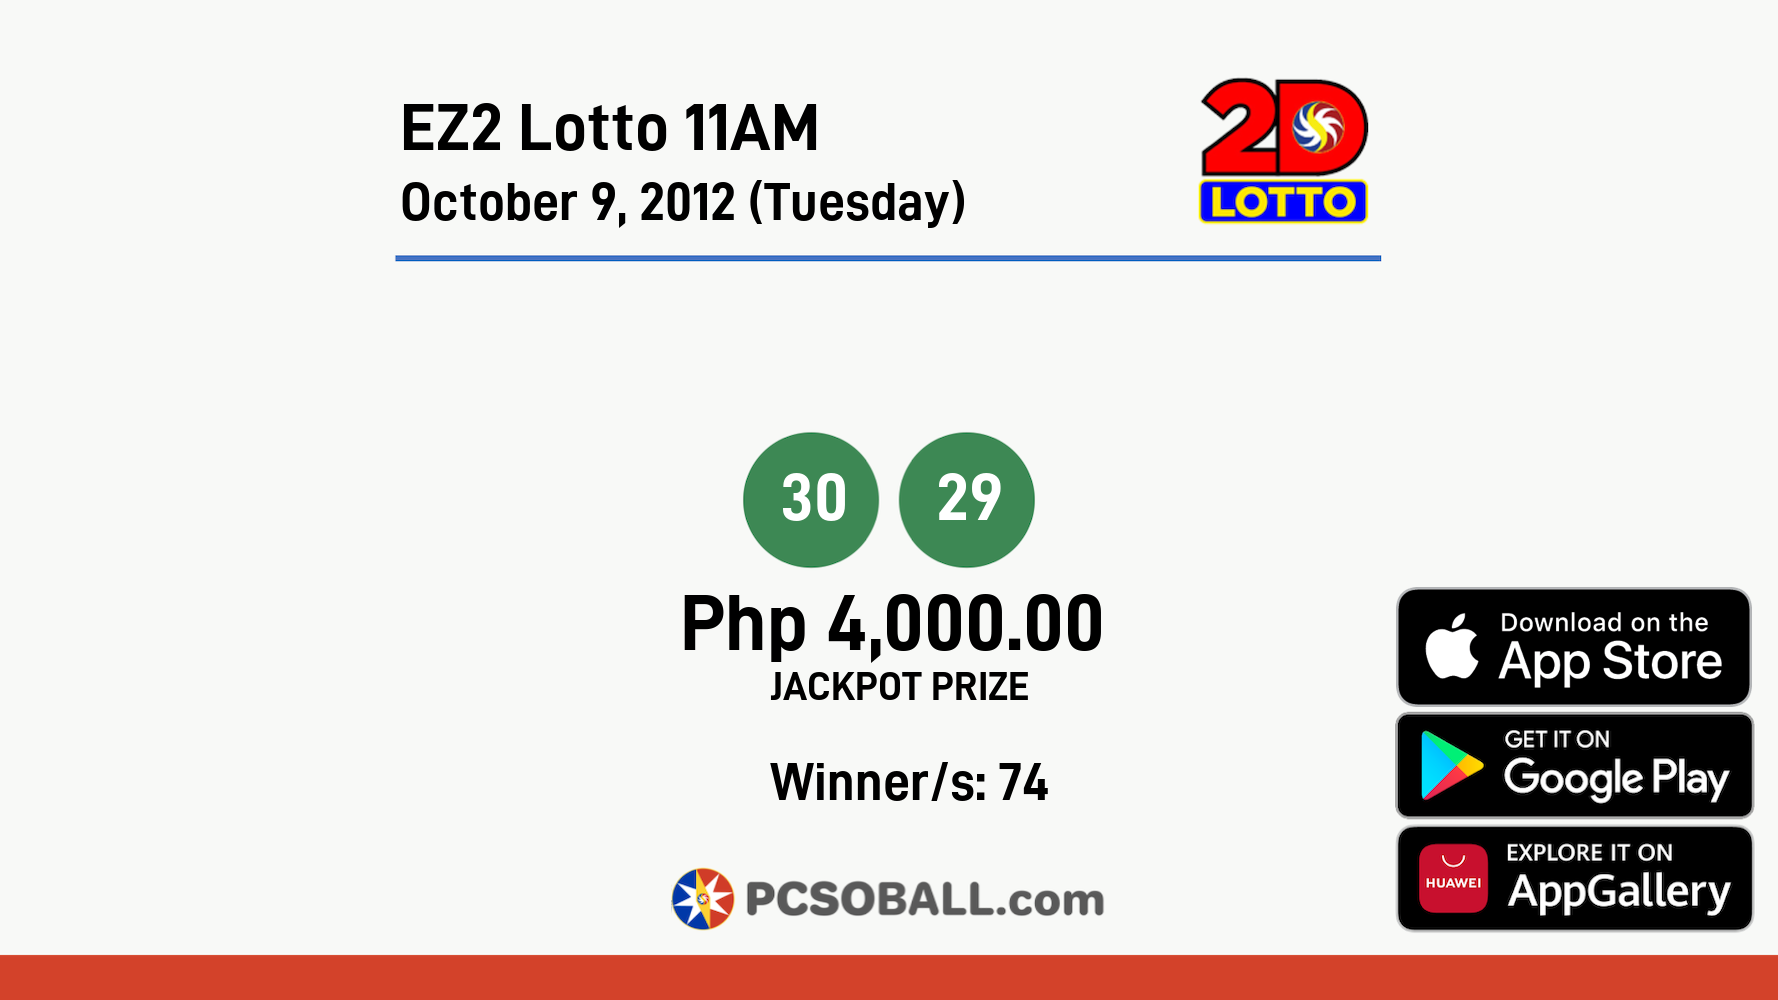 EZ2 Lotto 11AM October 9, 2012 (Tuesday) Result